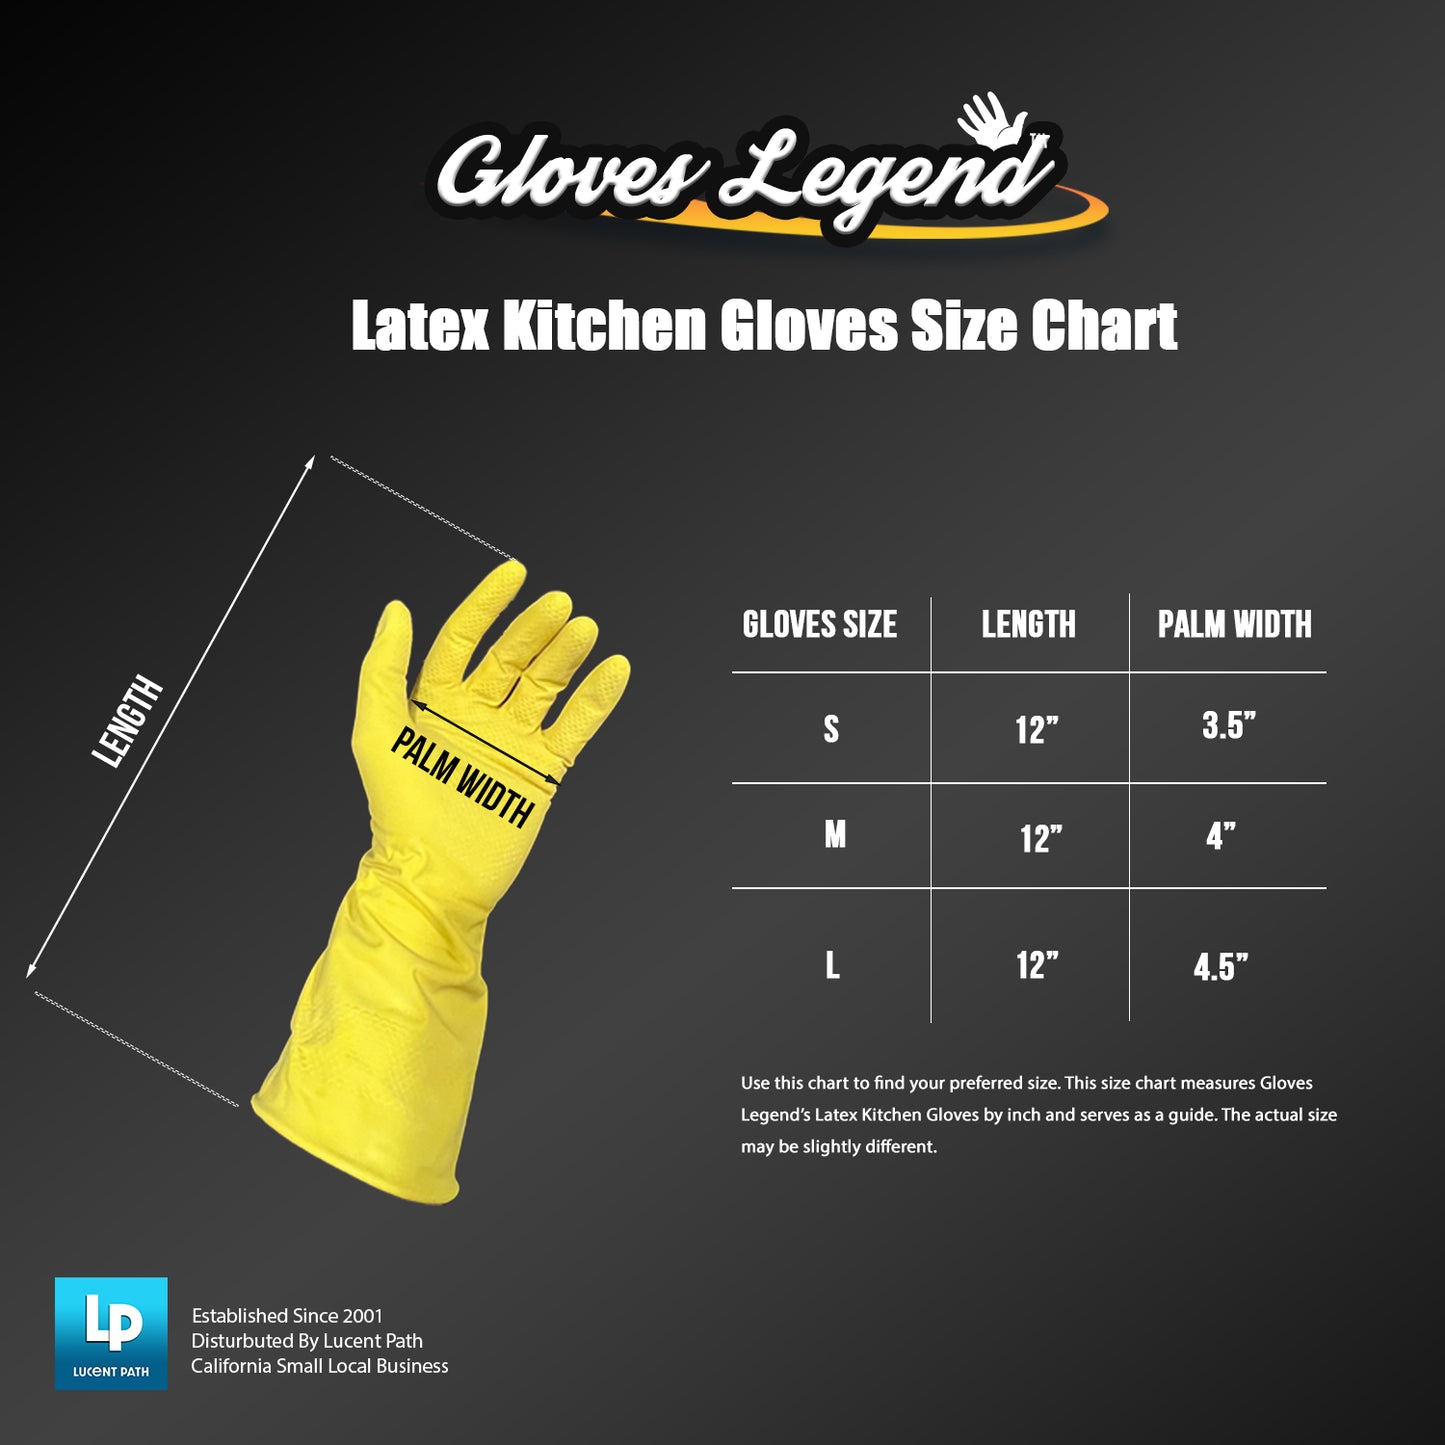 Large - 3 Pairs (6 Gloves) 12" Gloves Legend Yellow Latex Household Kitchen Cleaning Dishwashing Gloves - 18 mil